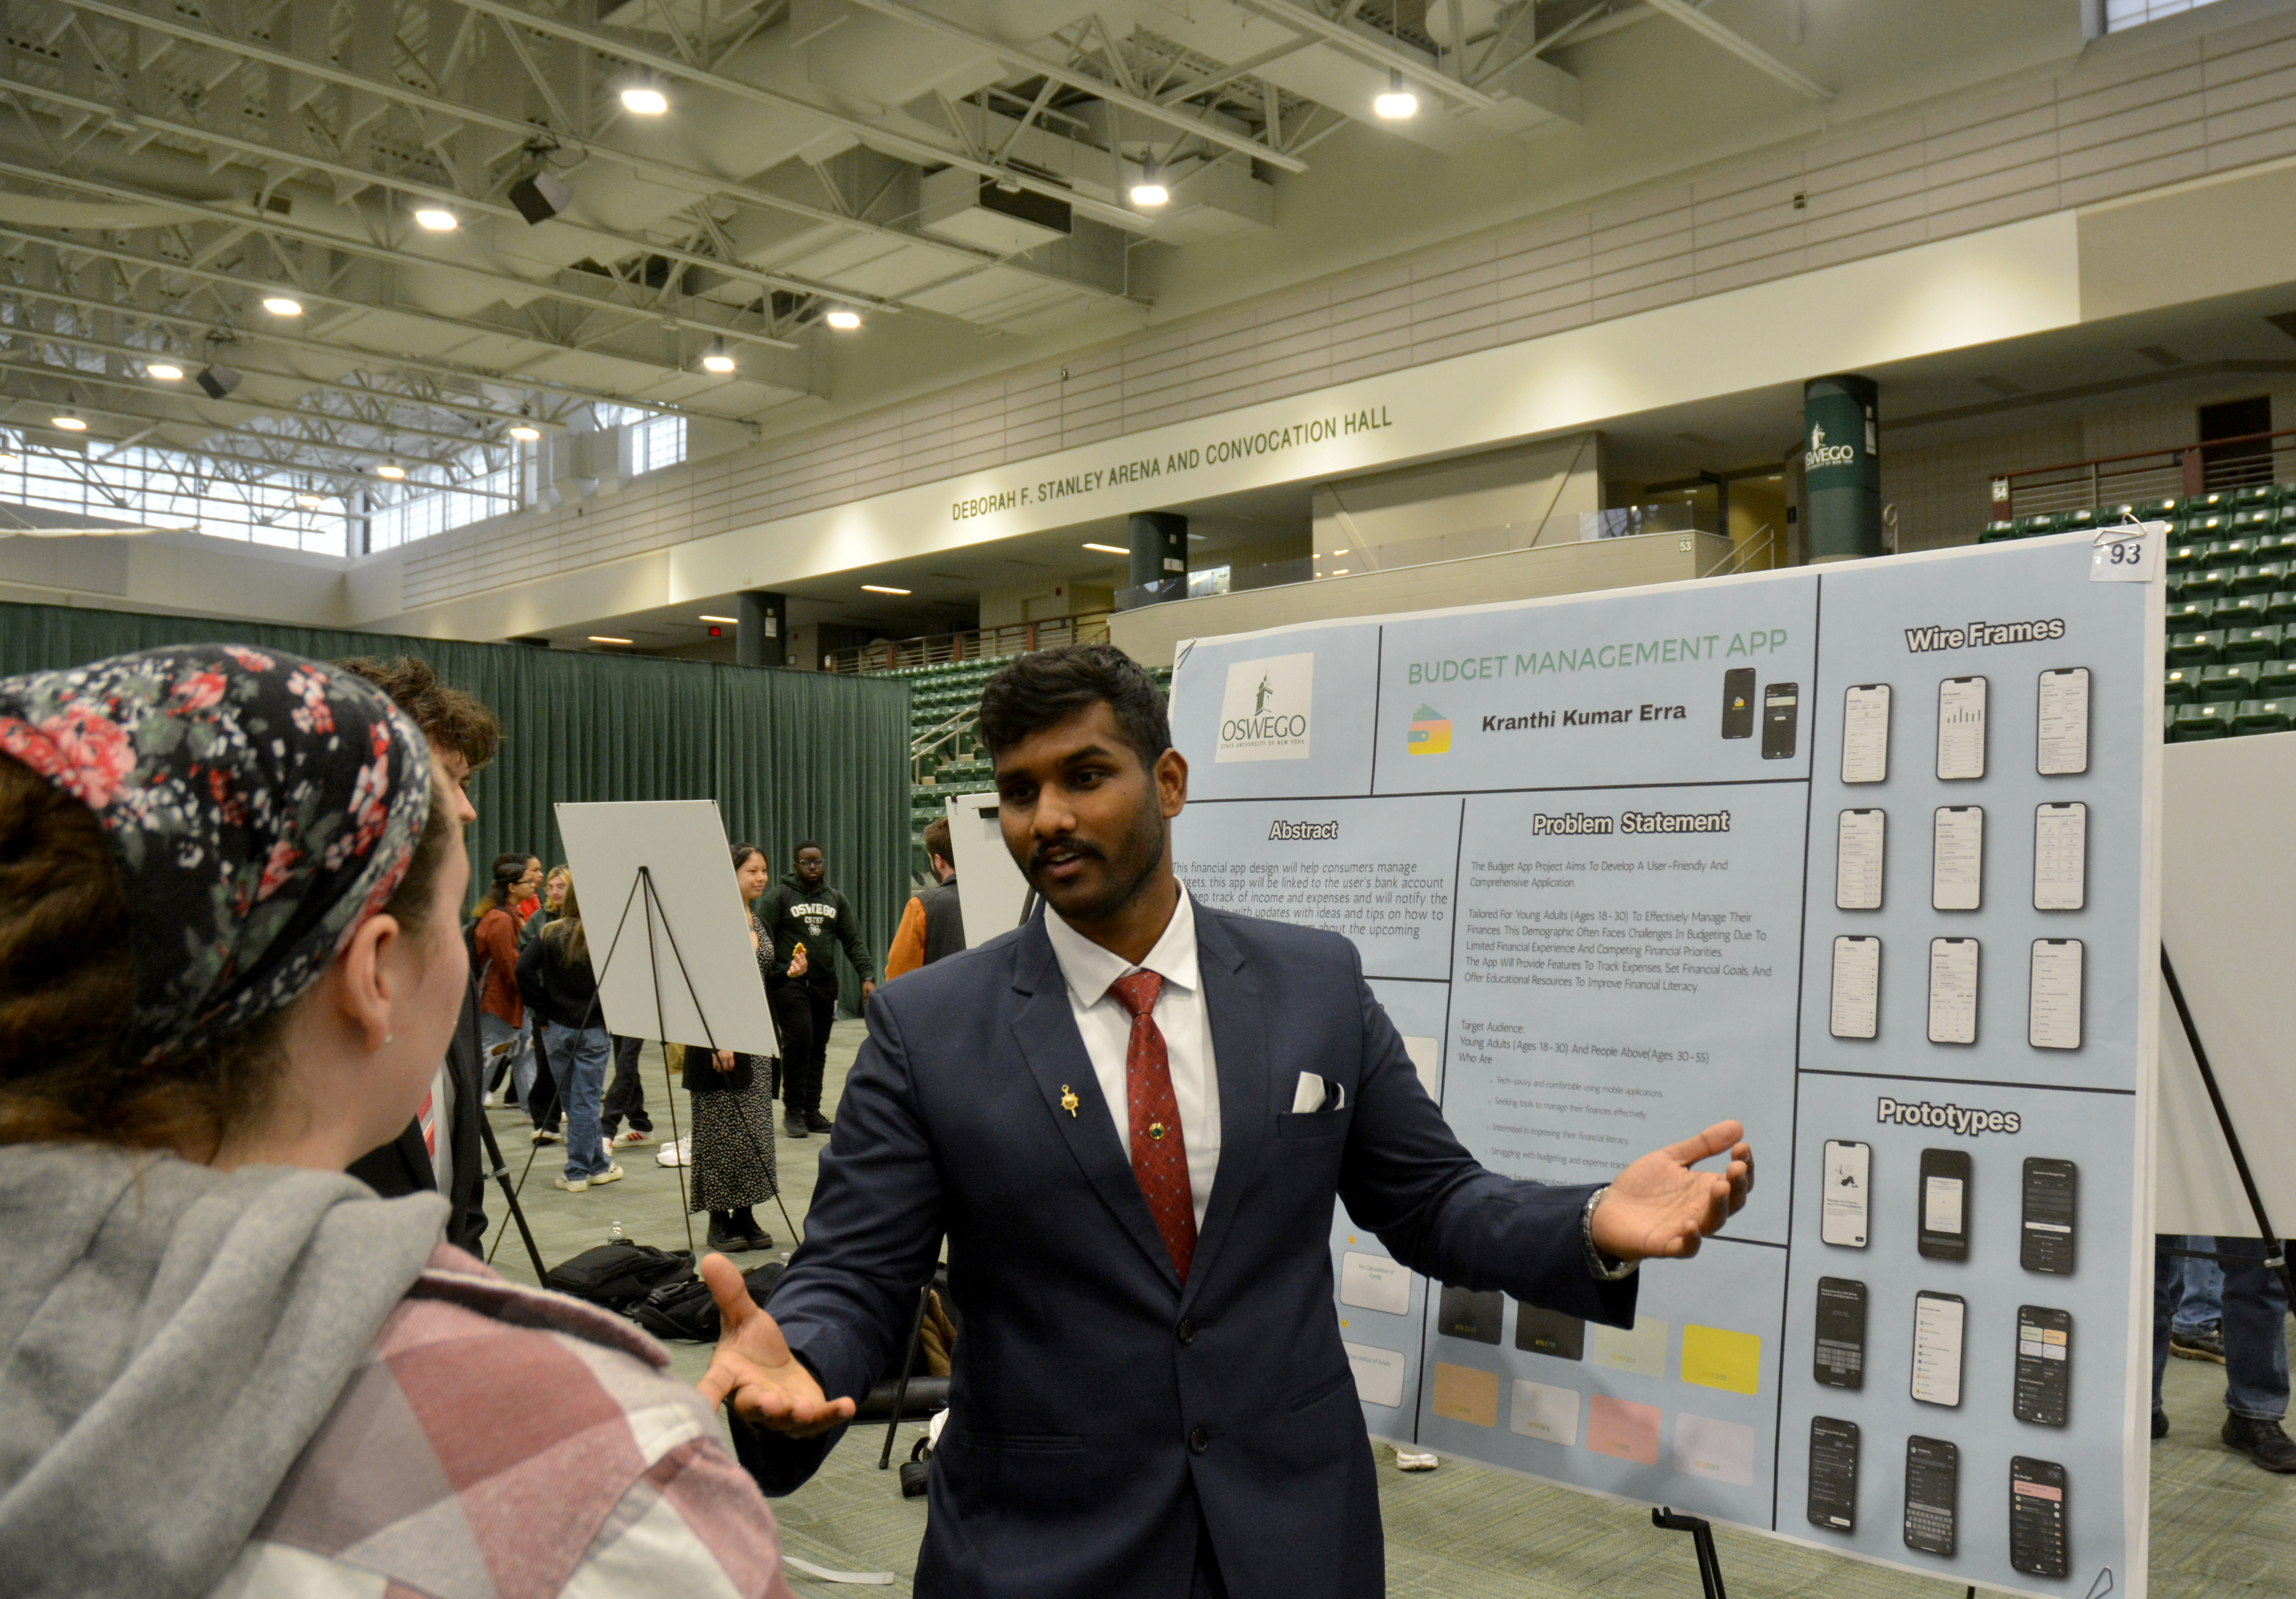 Master’s in human-computer interaction student Kranthi Kumar Erra presents about developing the Budget Management App during the Quest poster session on April 17.